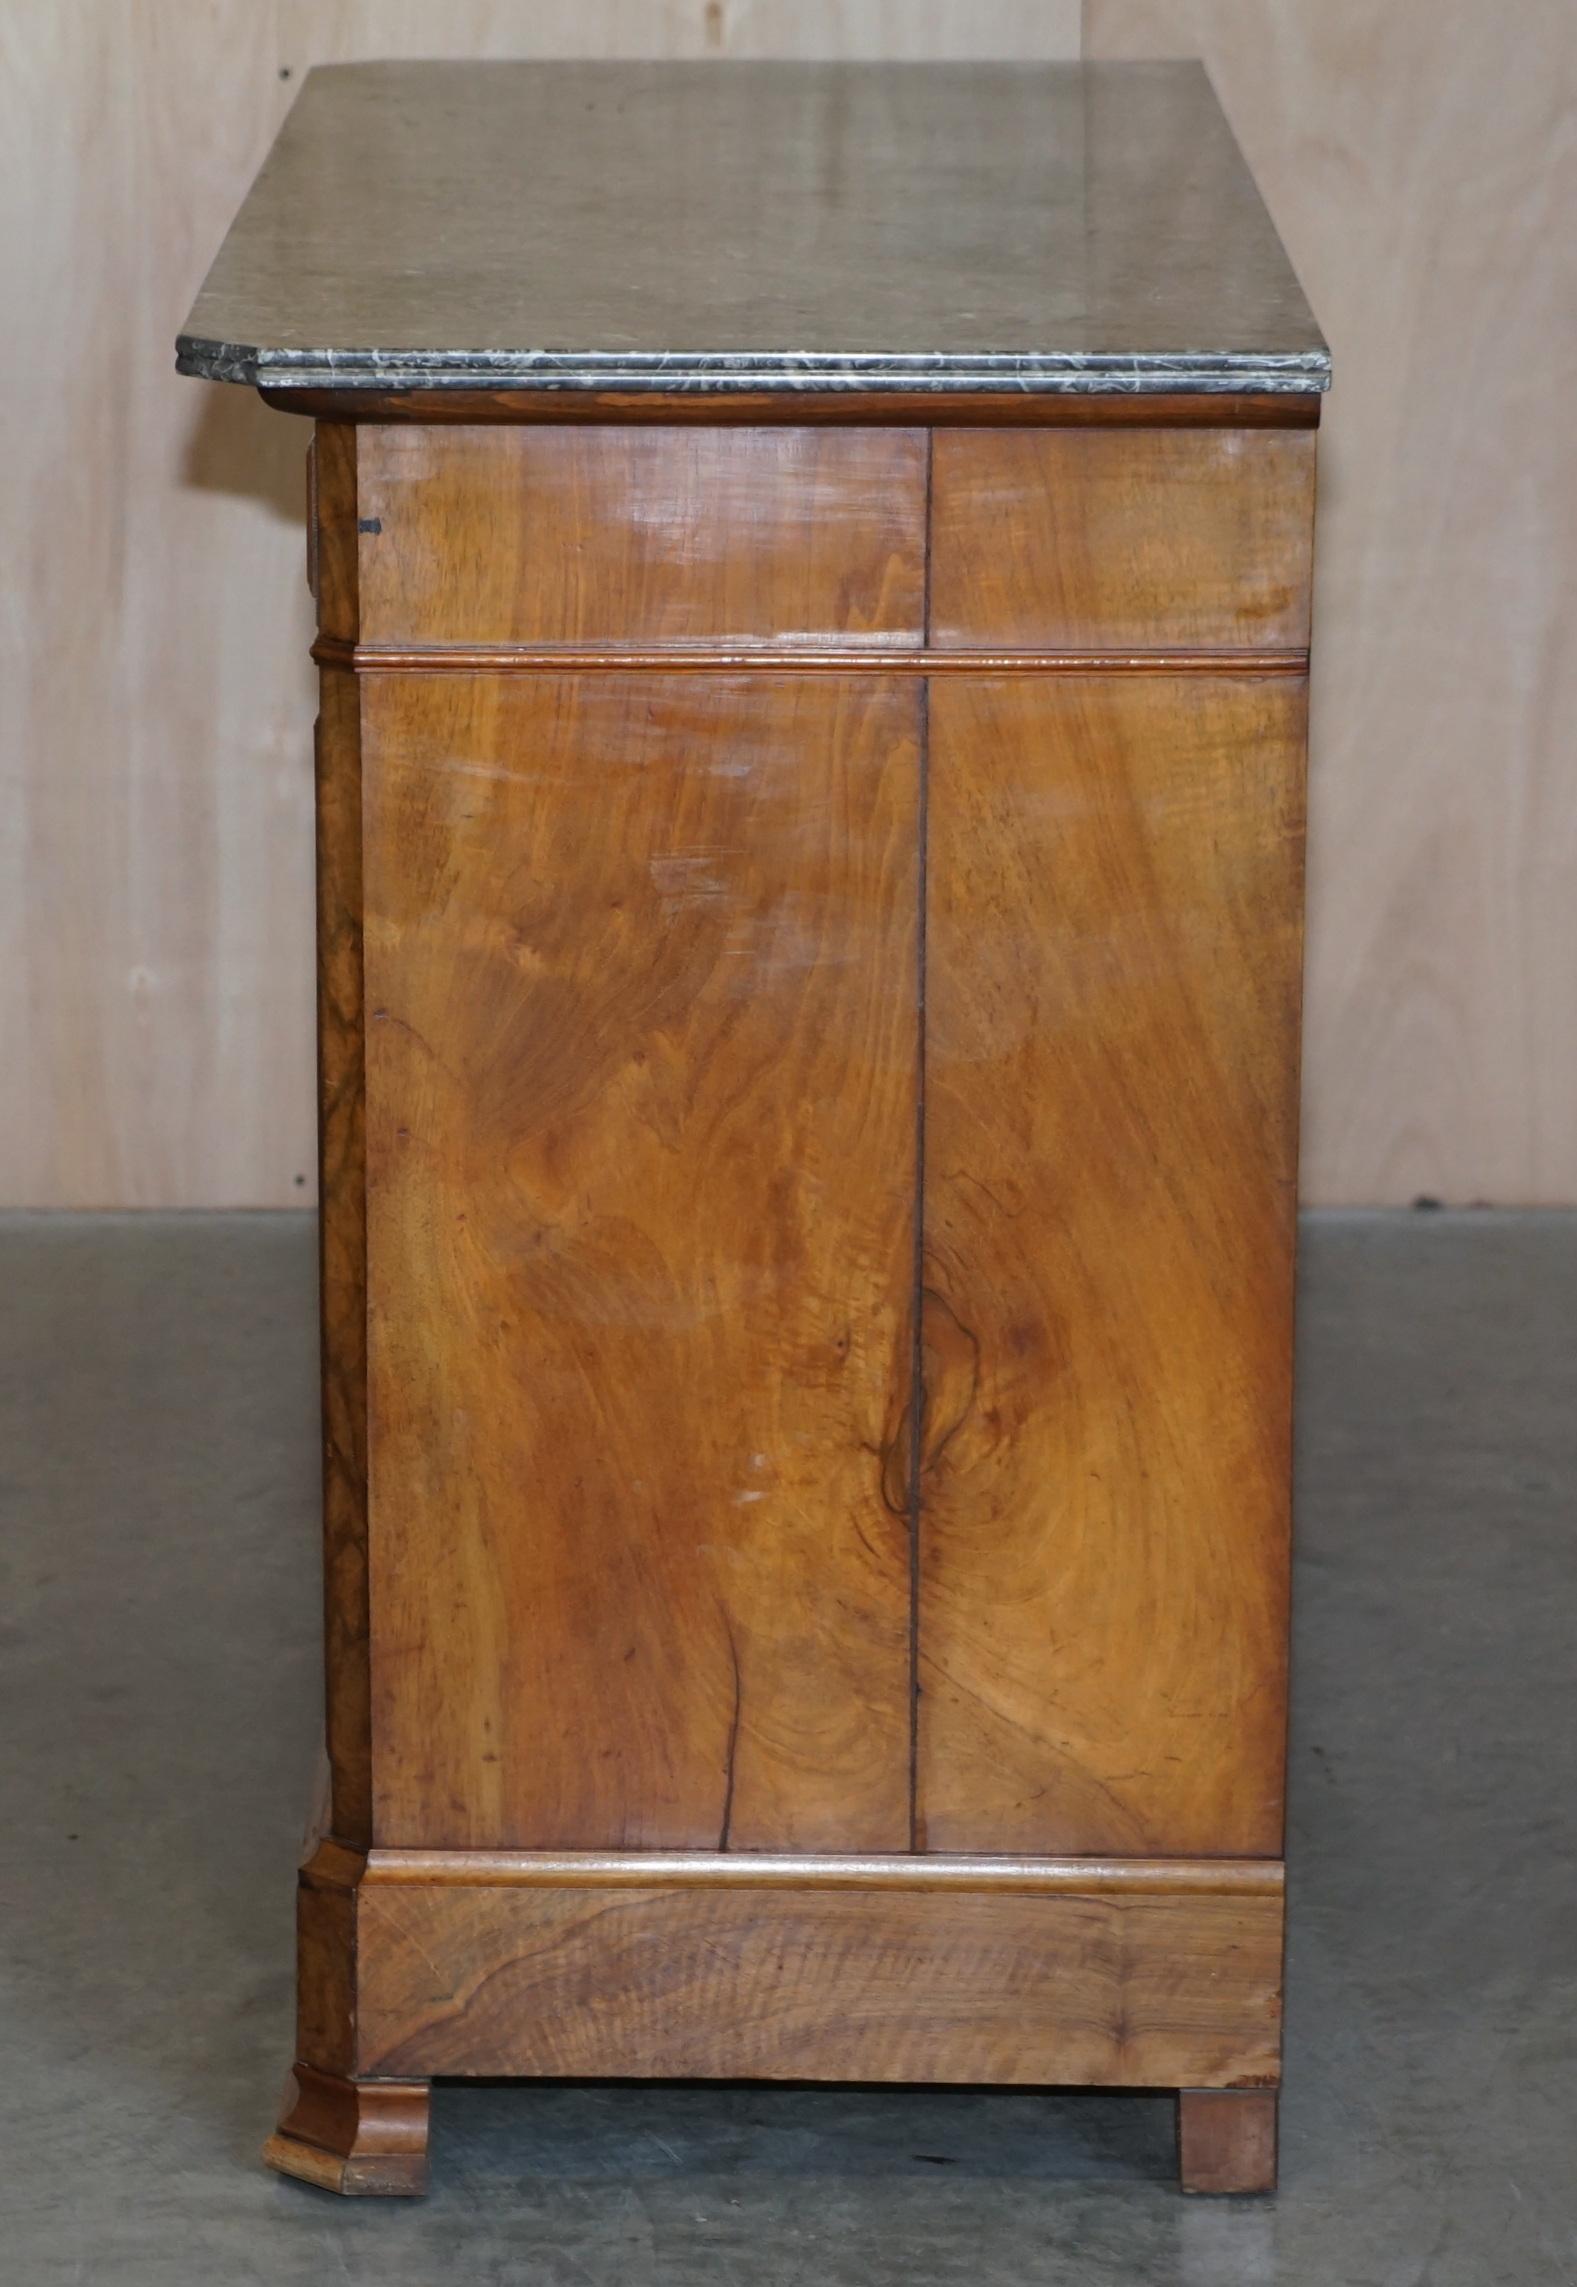 Antique circa 1860 Walnut & Marble Topped Chest of Drawers with Original Key For Sale 8